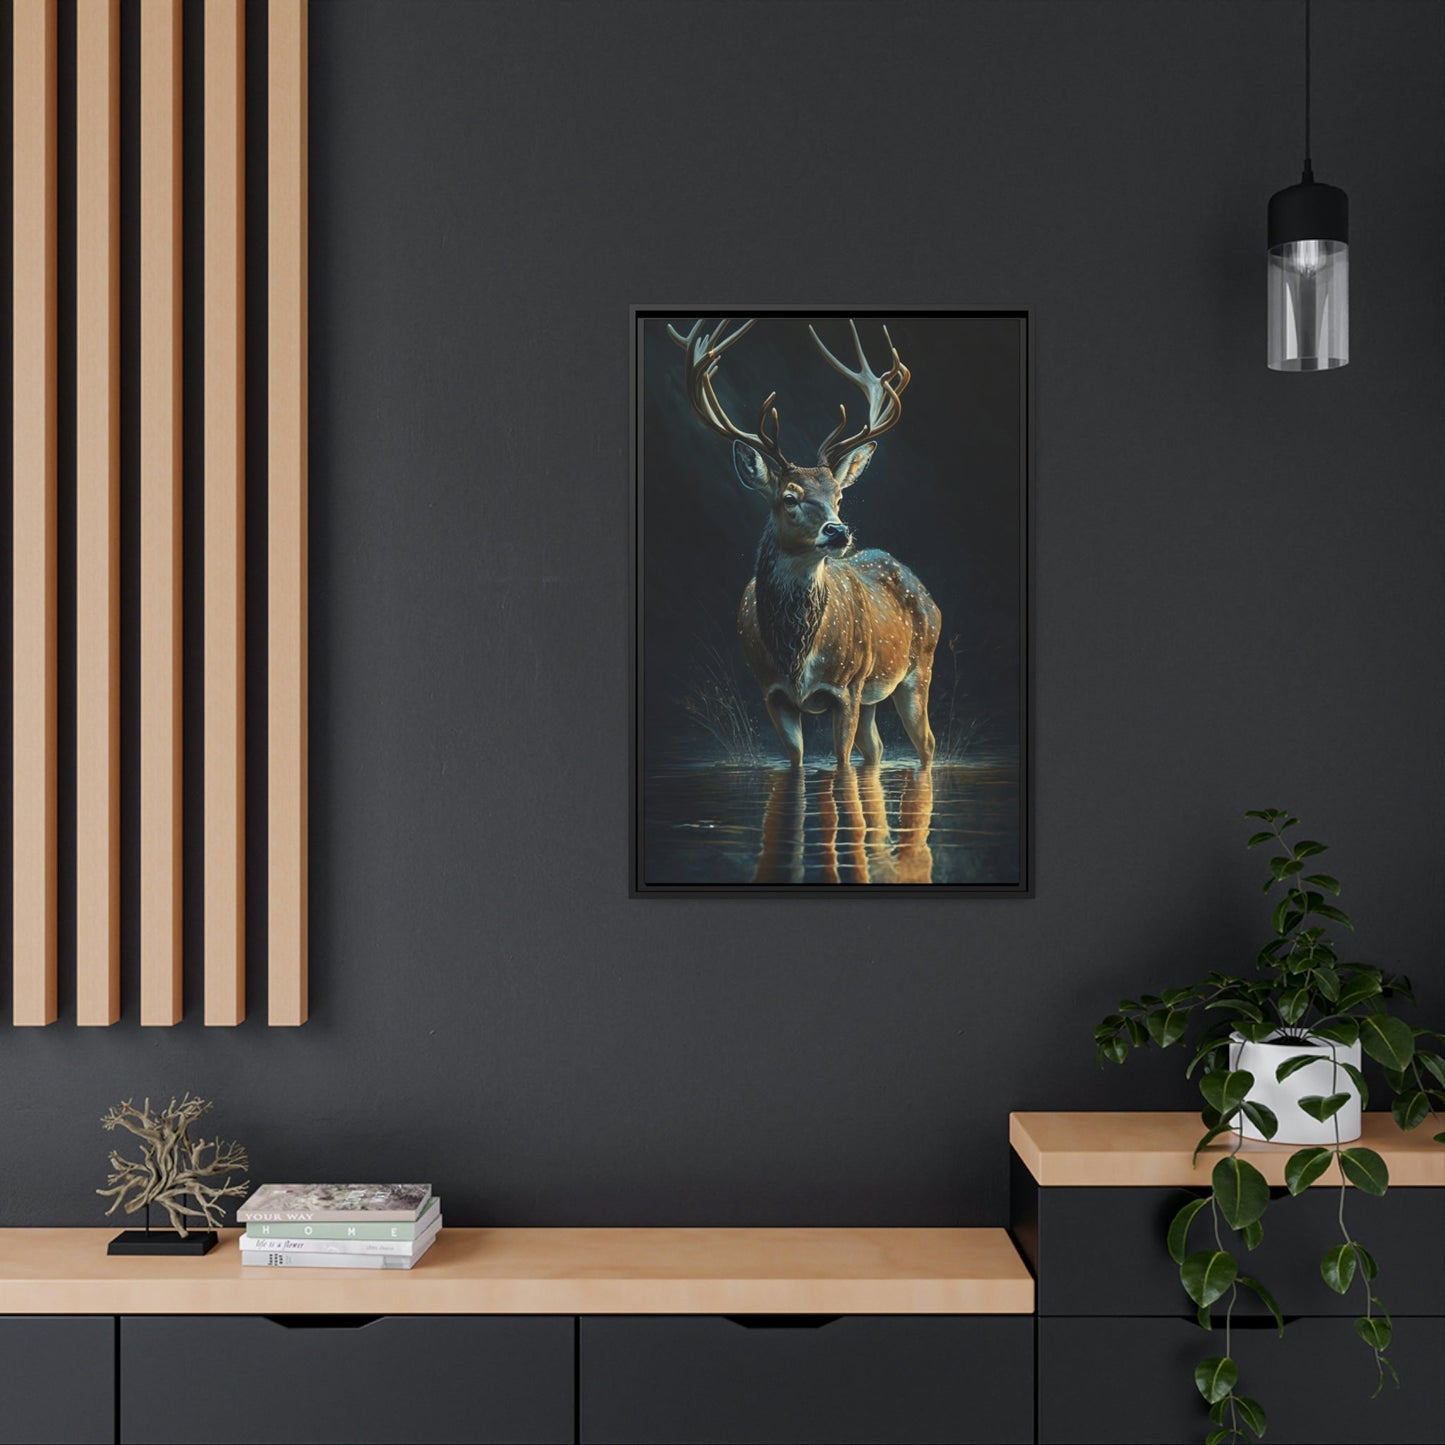 The Grace of Deer: A Canvas Artistic Expression